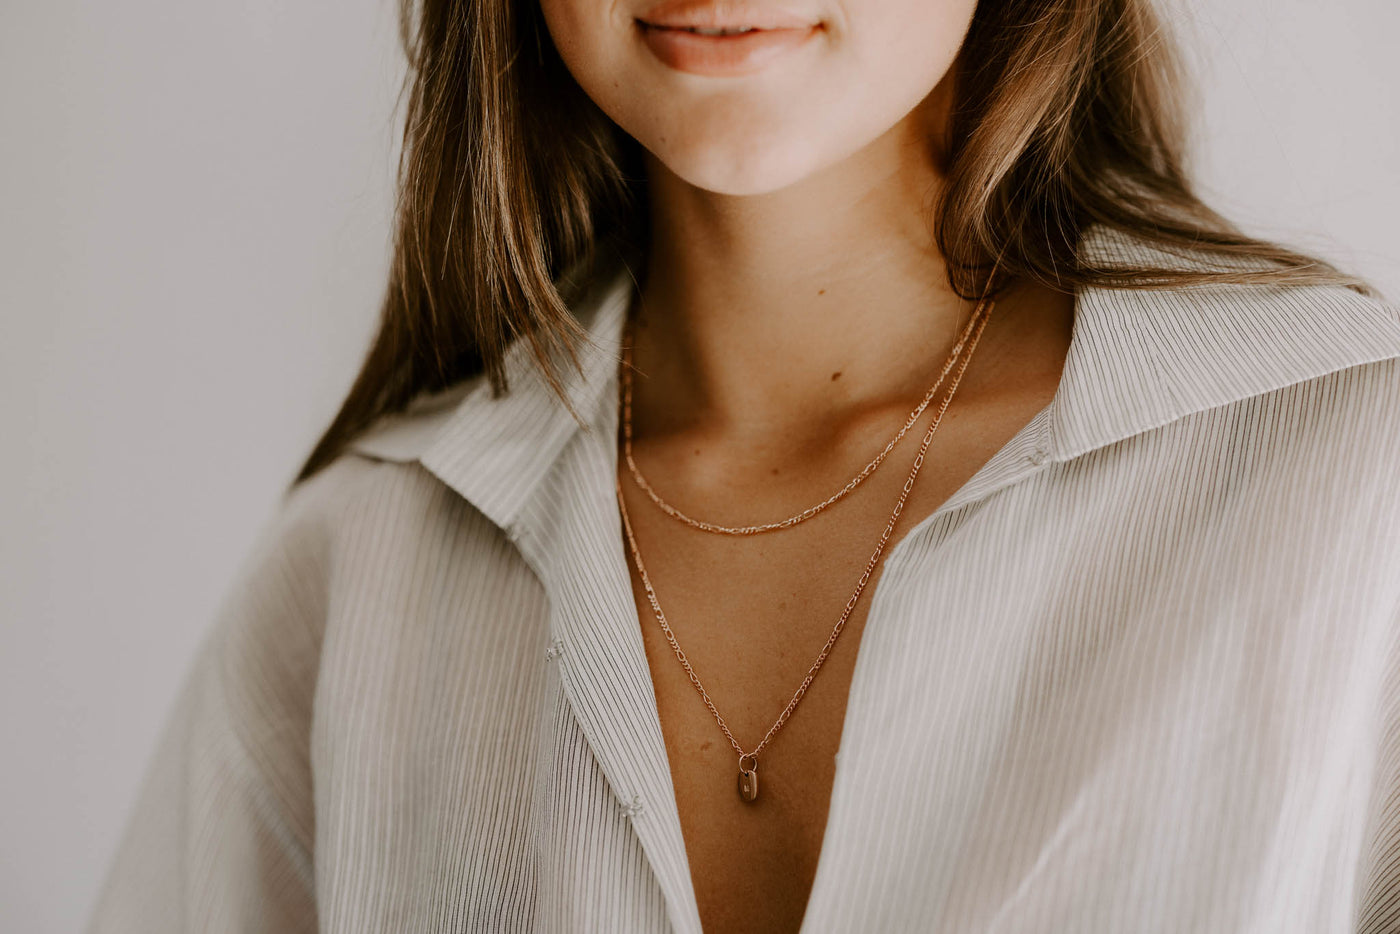 A woman is wearing a 45cm Figaro Necklace with a 55cm Figaro Necklace with a Rectangular Pendant